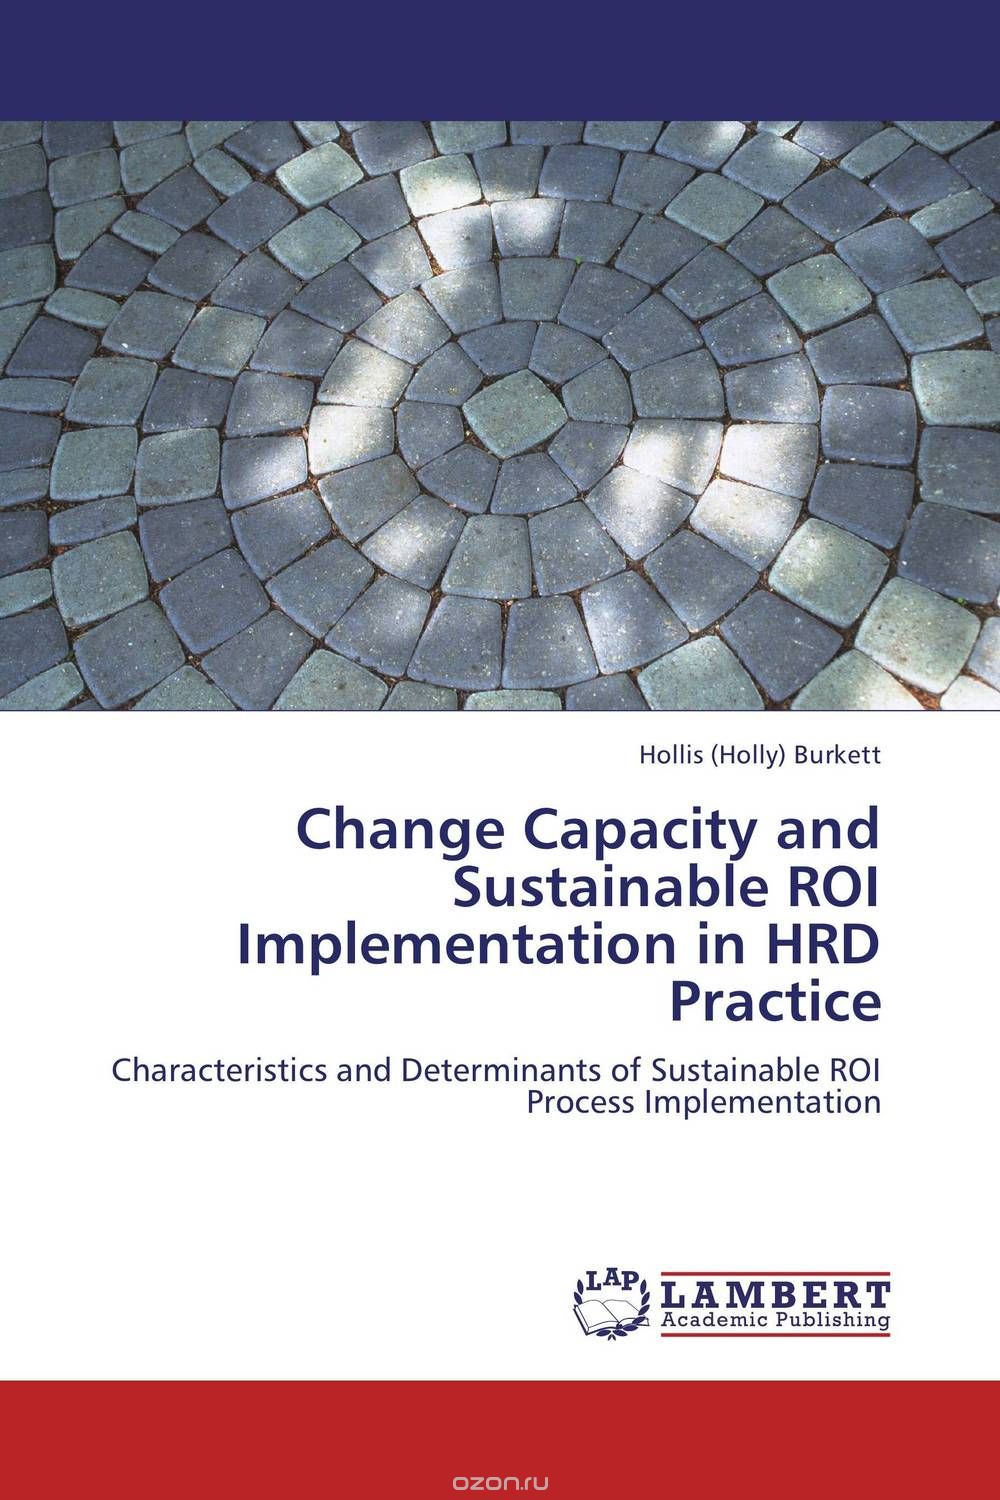 Change Capacity and Sustainable ROI Implementation in HRD Practice